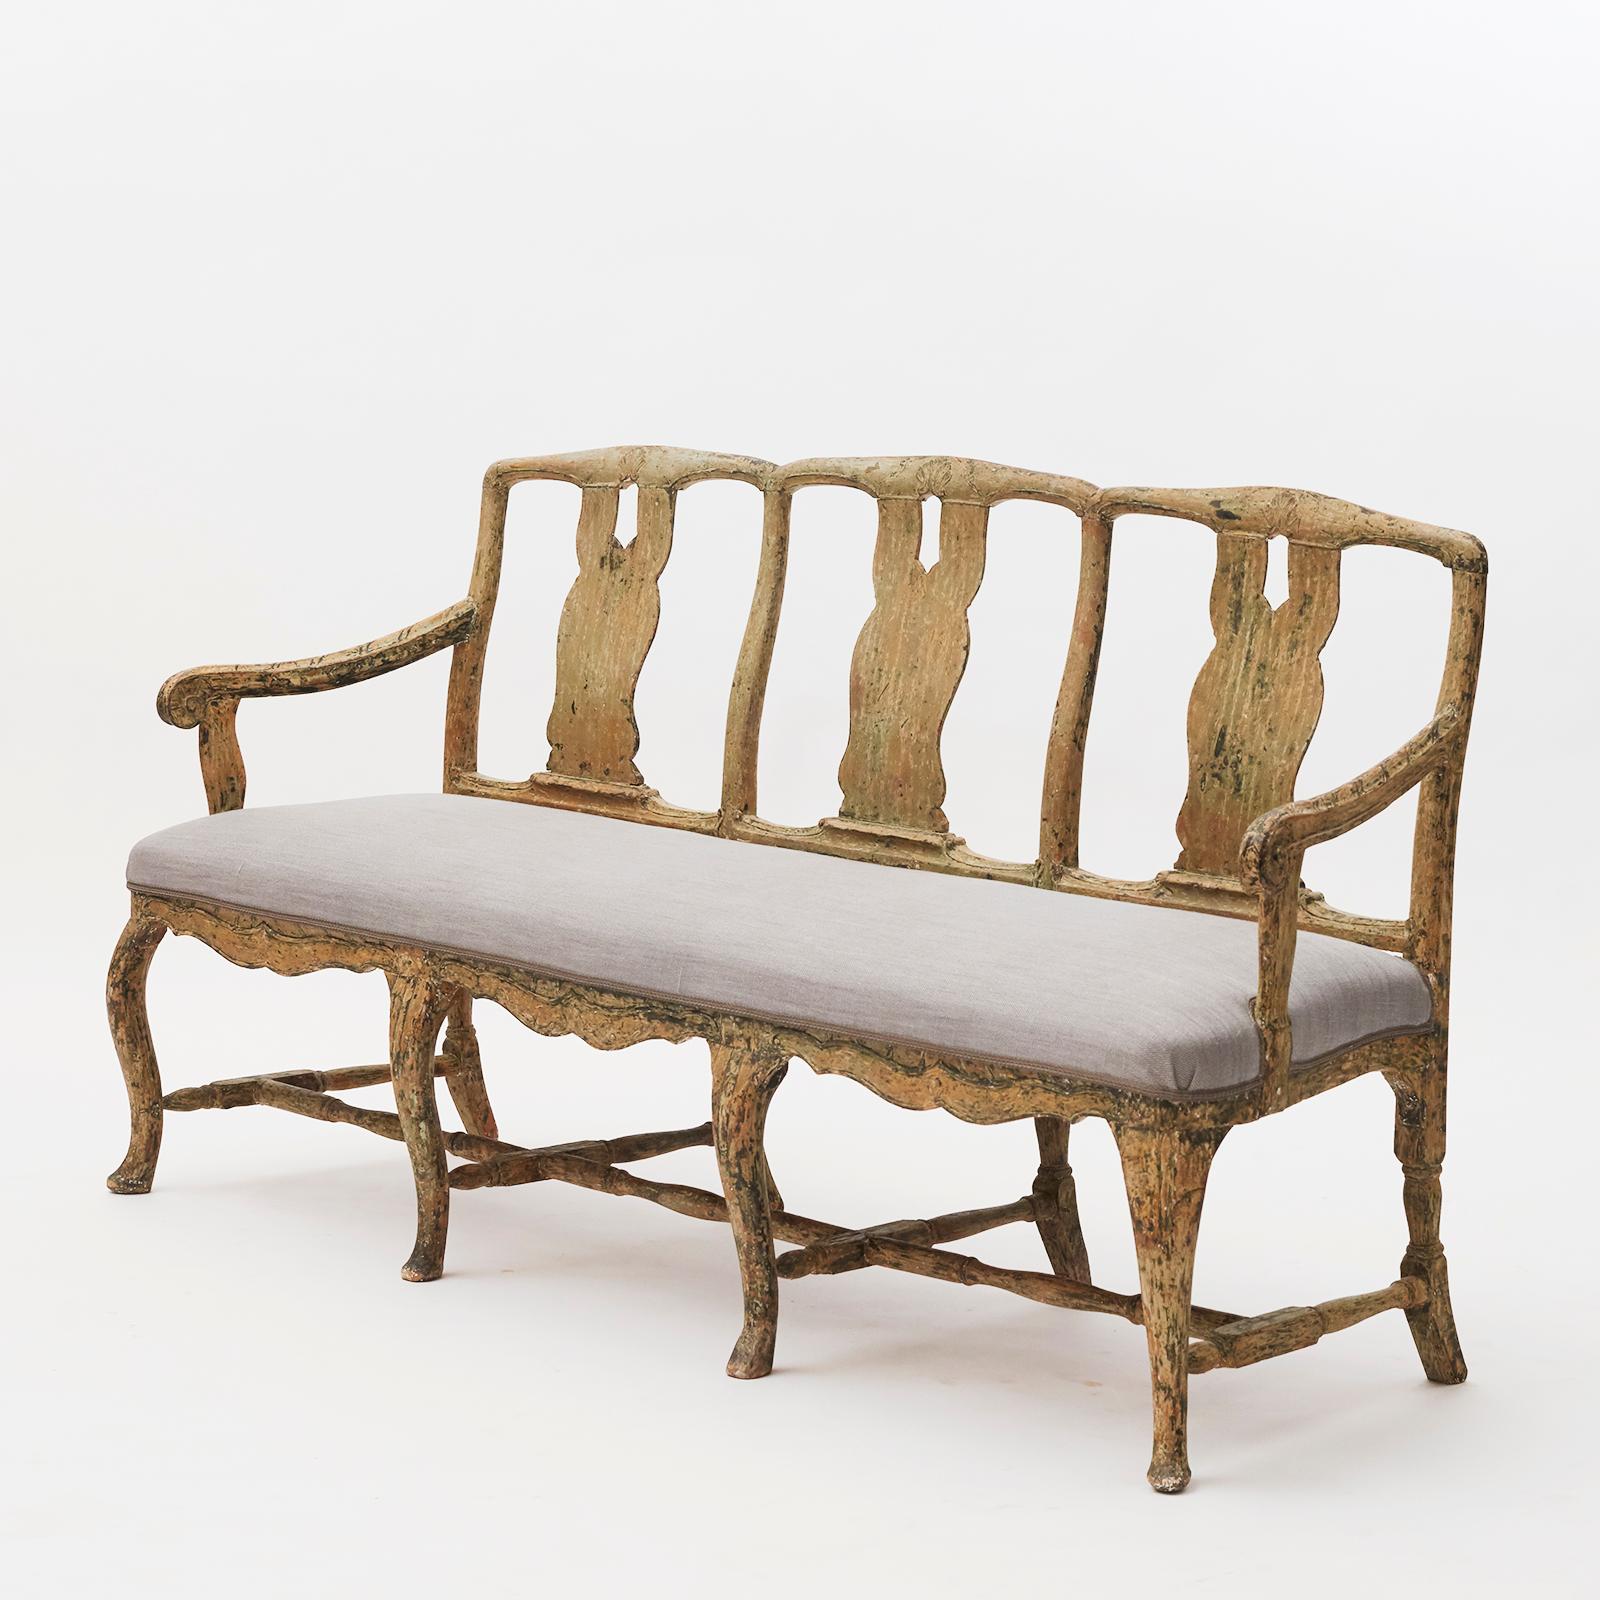 Swedish Regence bench, original beige-green color with natural patina. At the top of the back pieces cut in the form of clams, Sweden, 1740-1750. The seat is reupholstered.
 